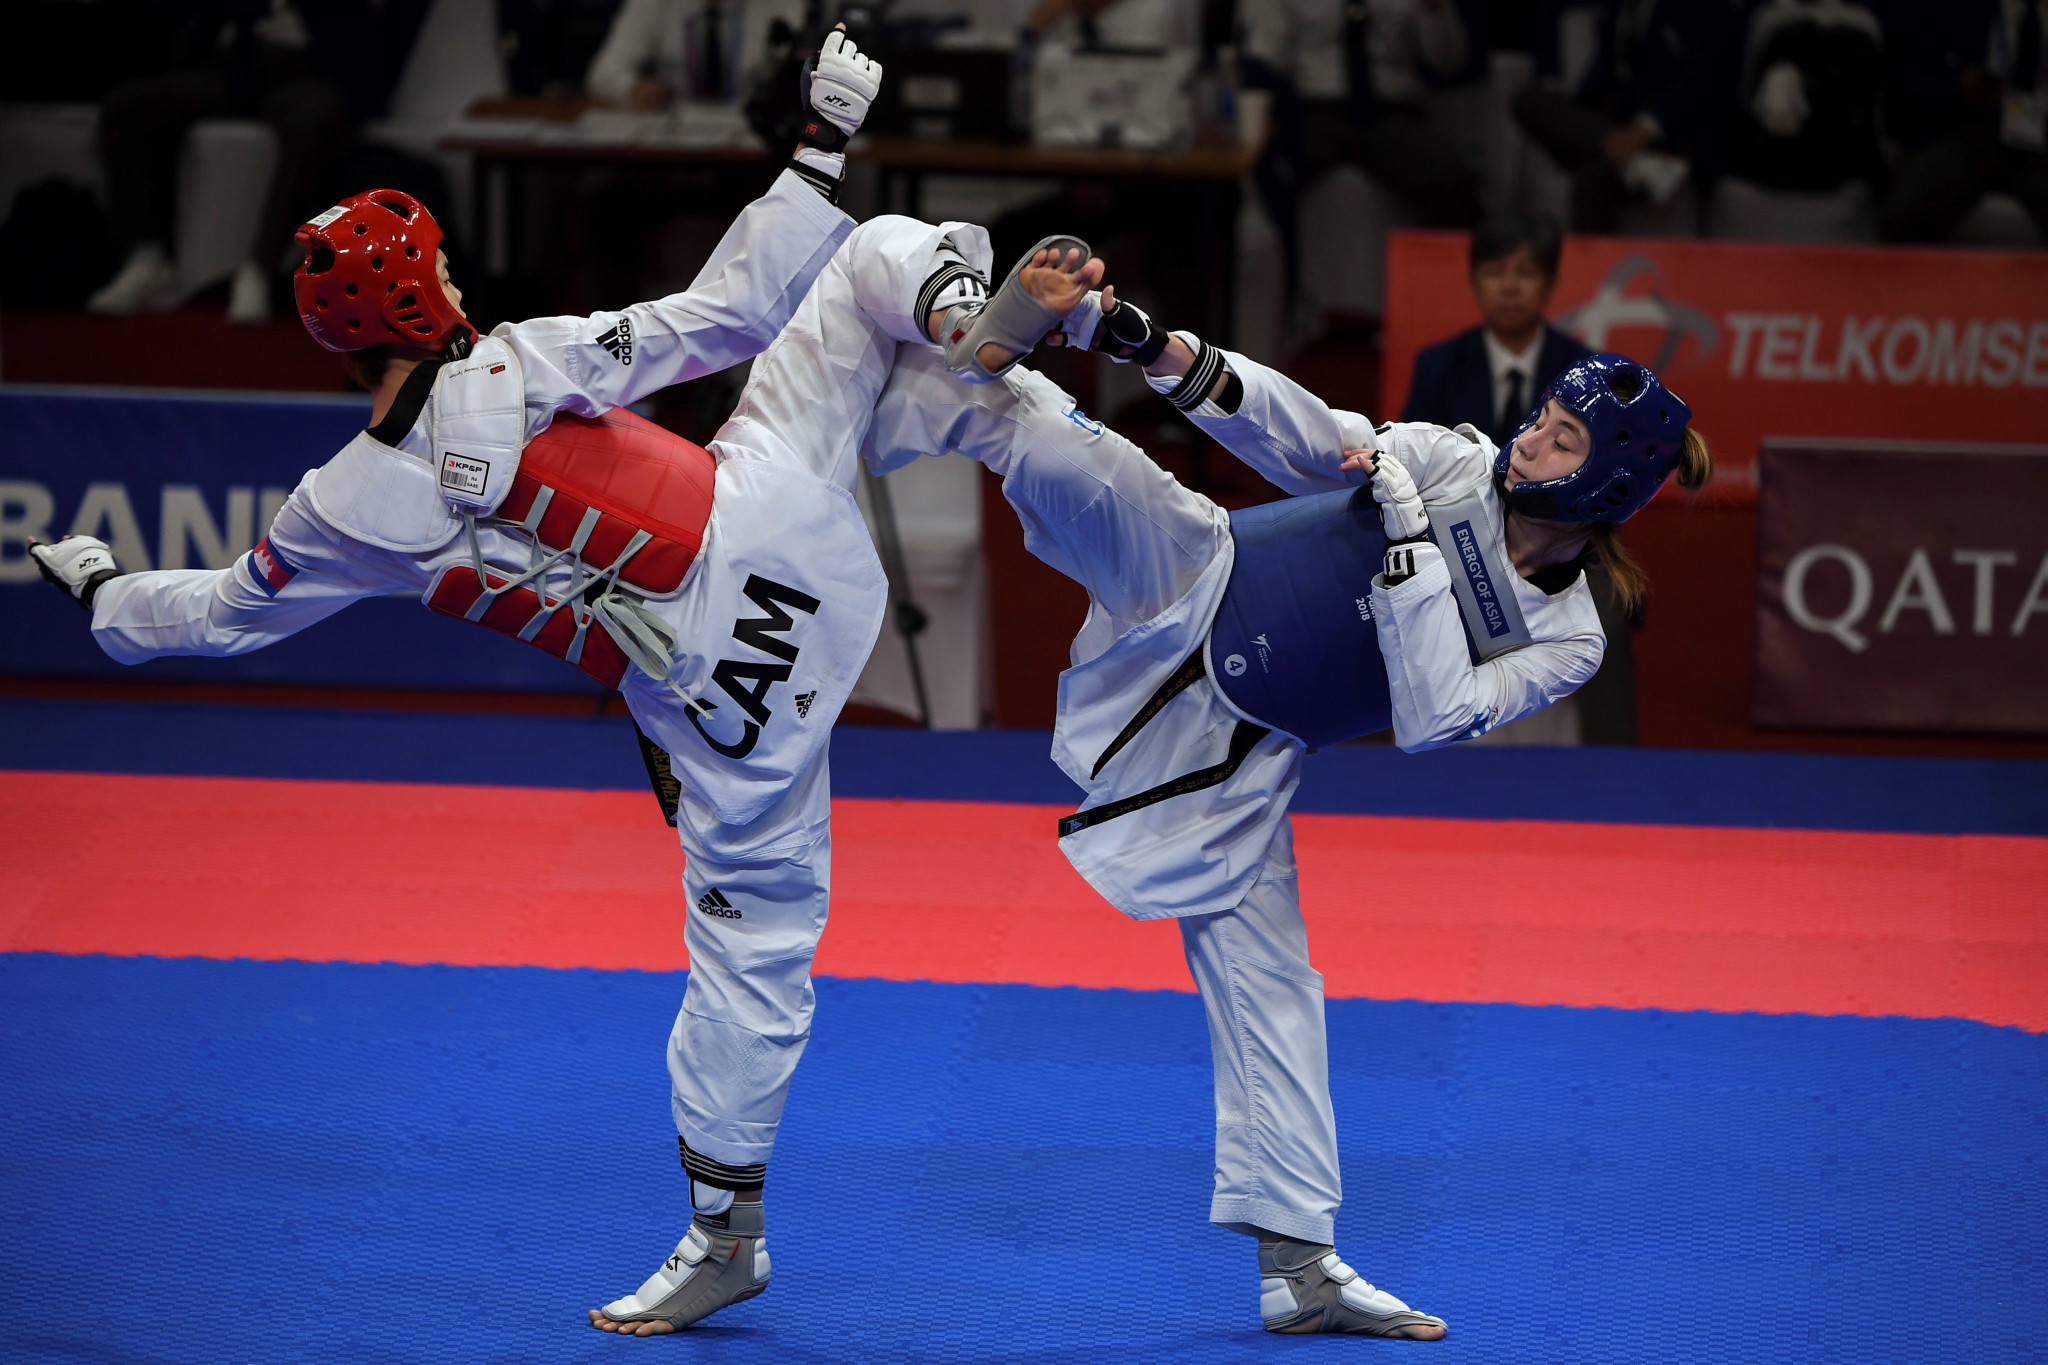 It is hoped the fund and university scholarships will help develop taekwondo in Cambodia ©Getty Images